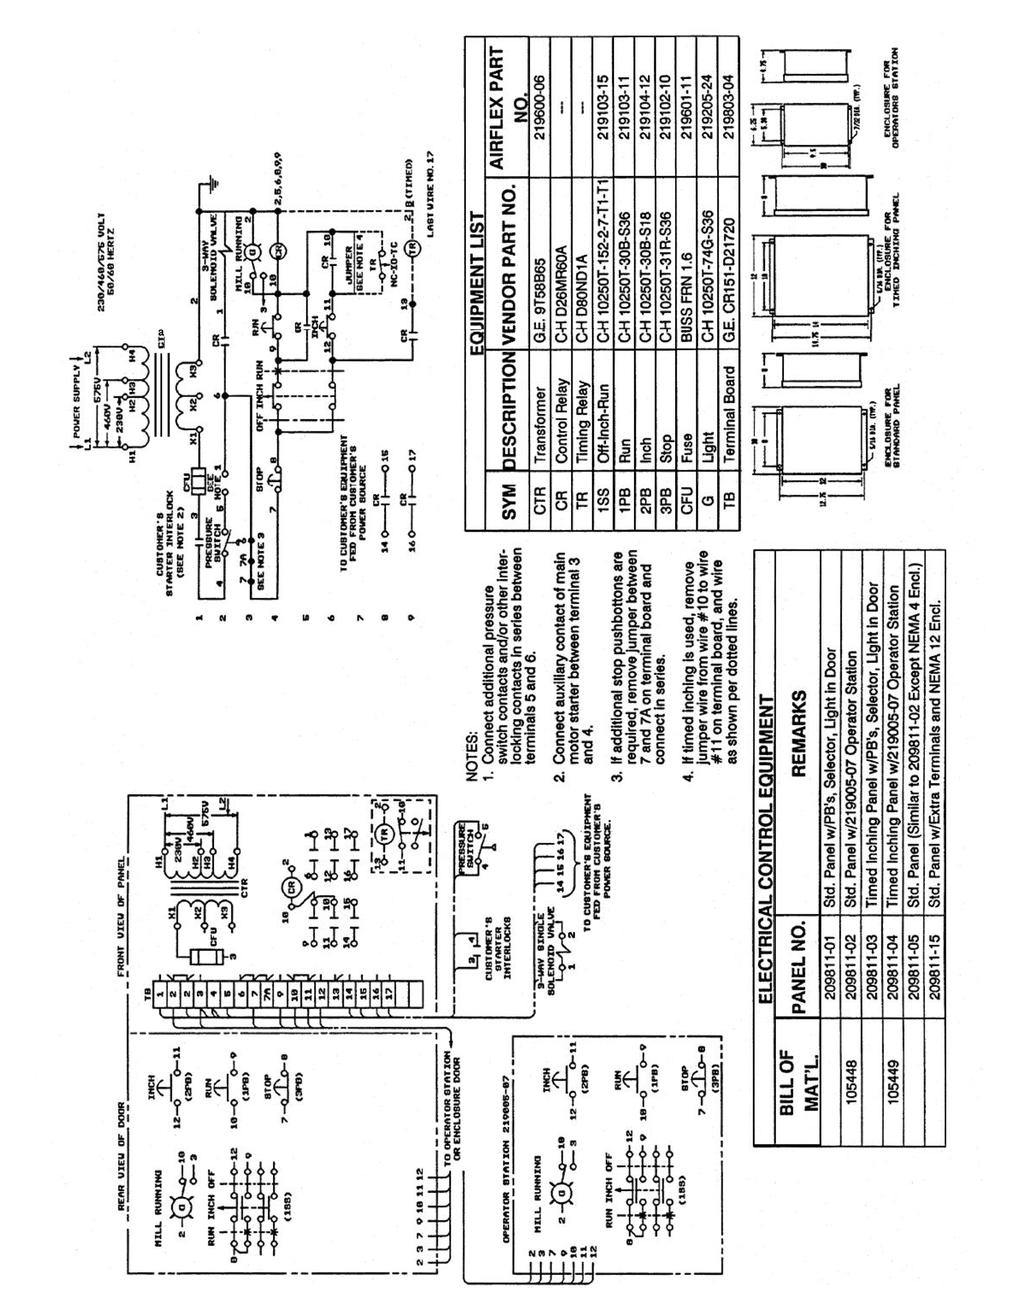 Figure 11 WIRING DIAGRAM FOR GRINDING MILL CONTROL PANEL REF.